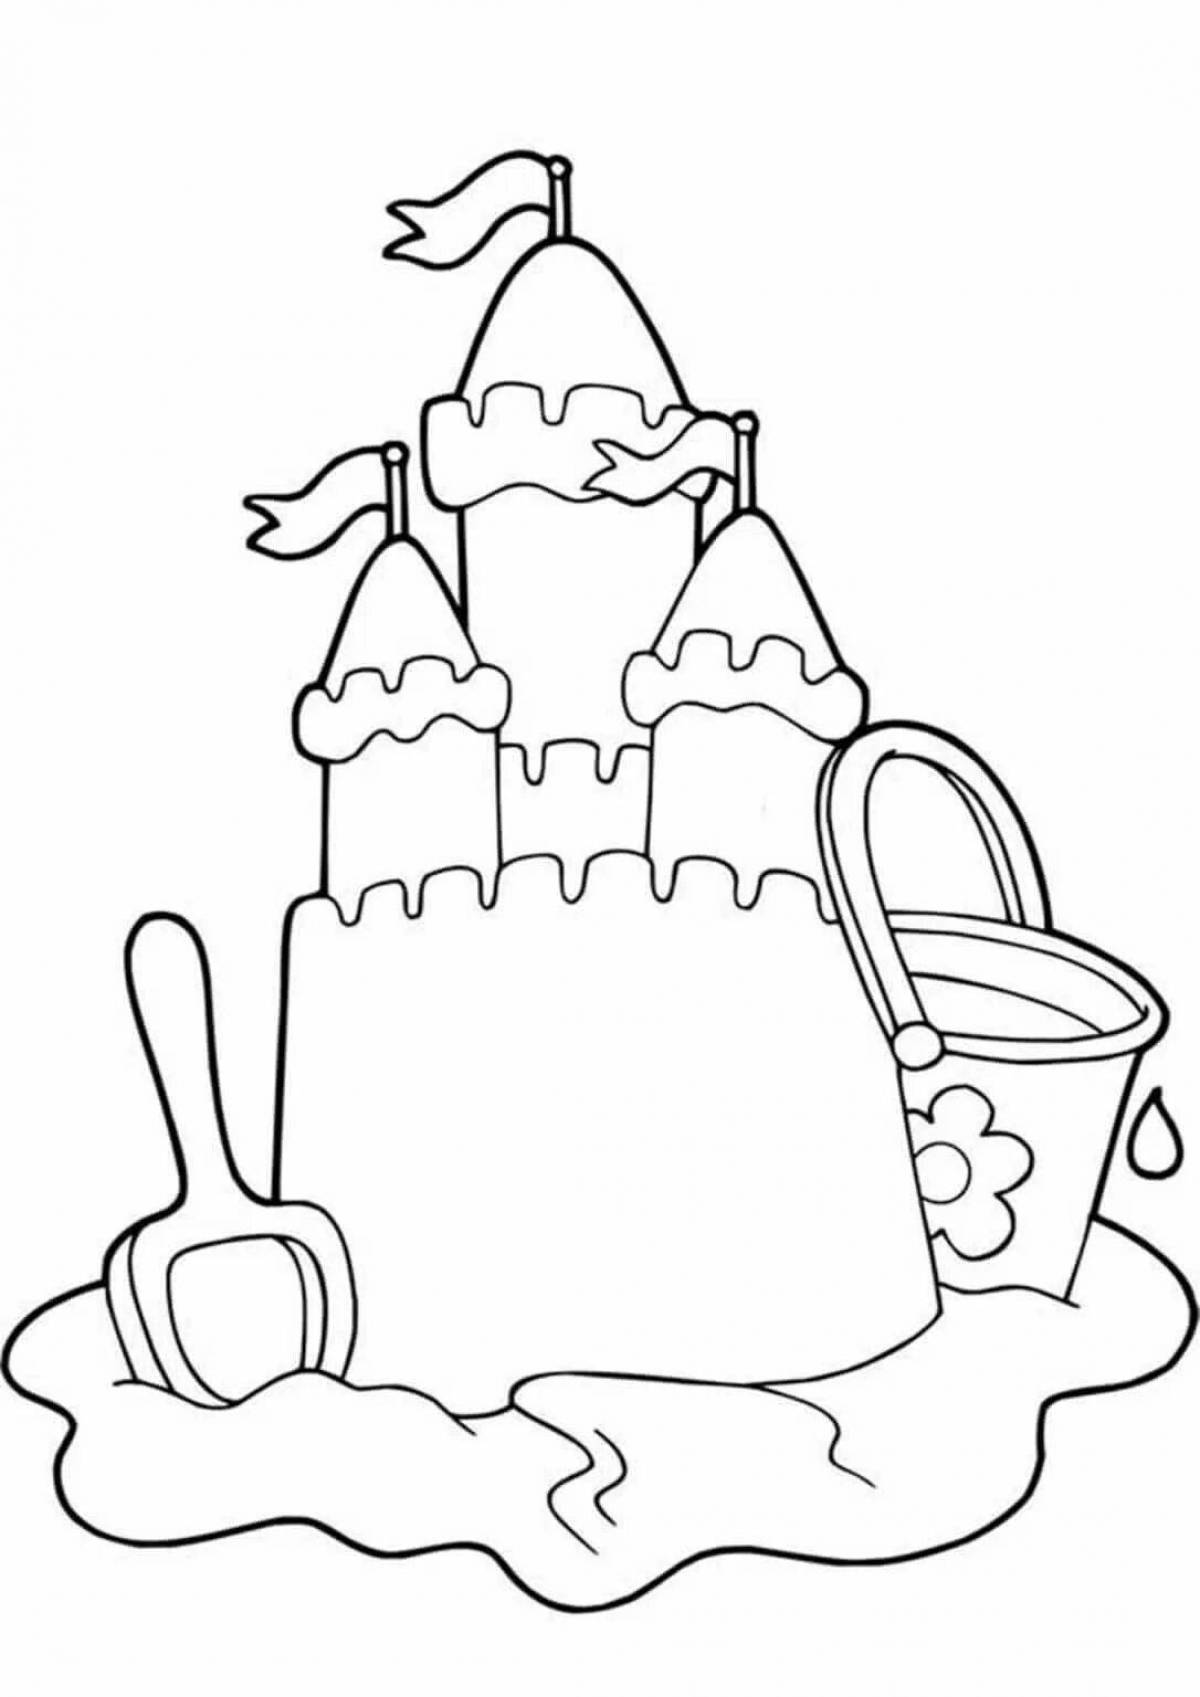 Intriguing sand game coloring page